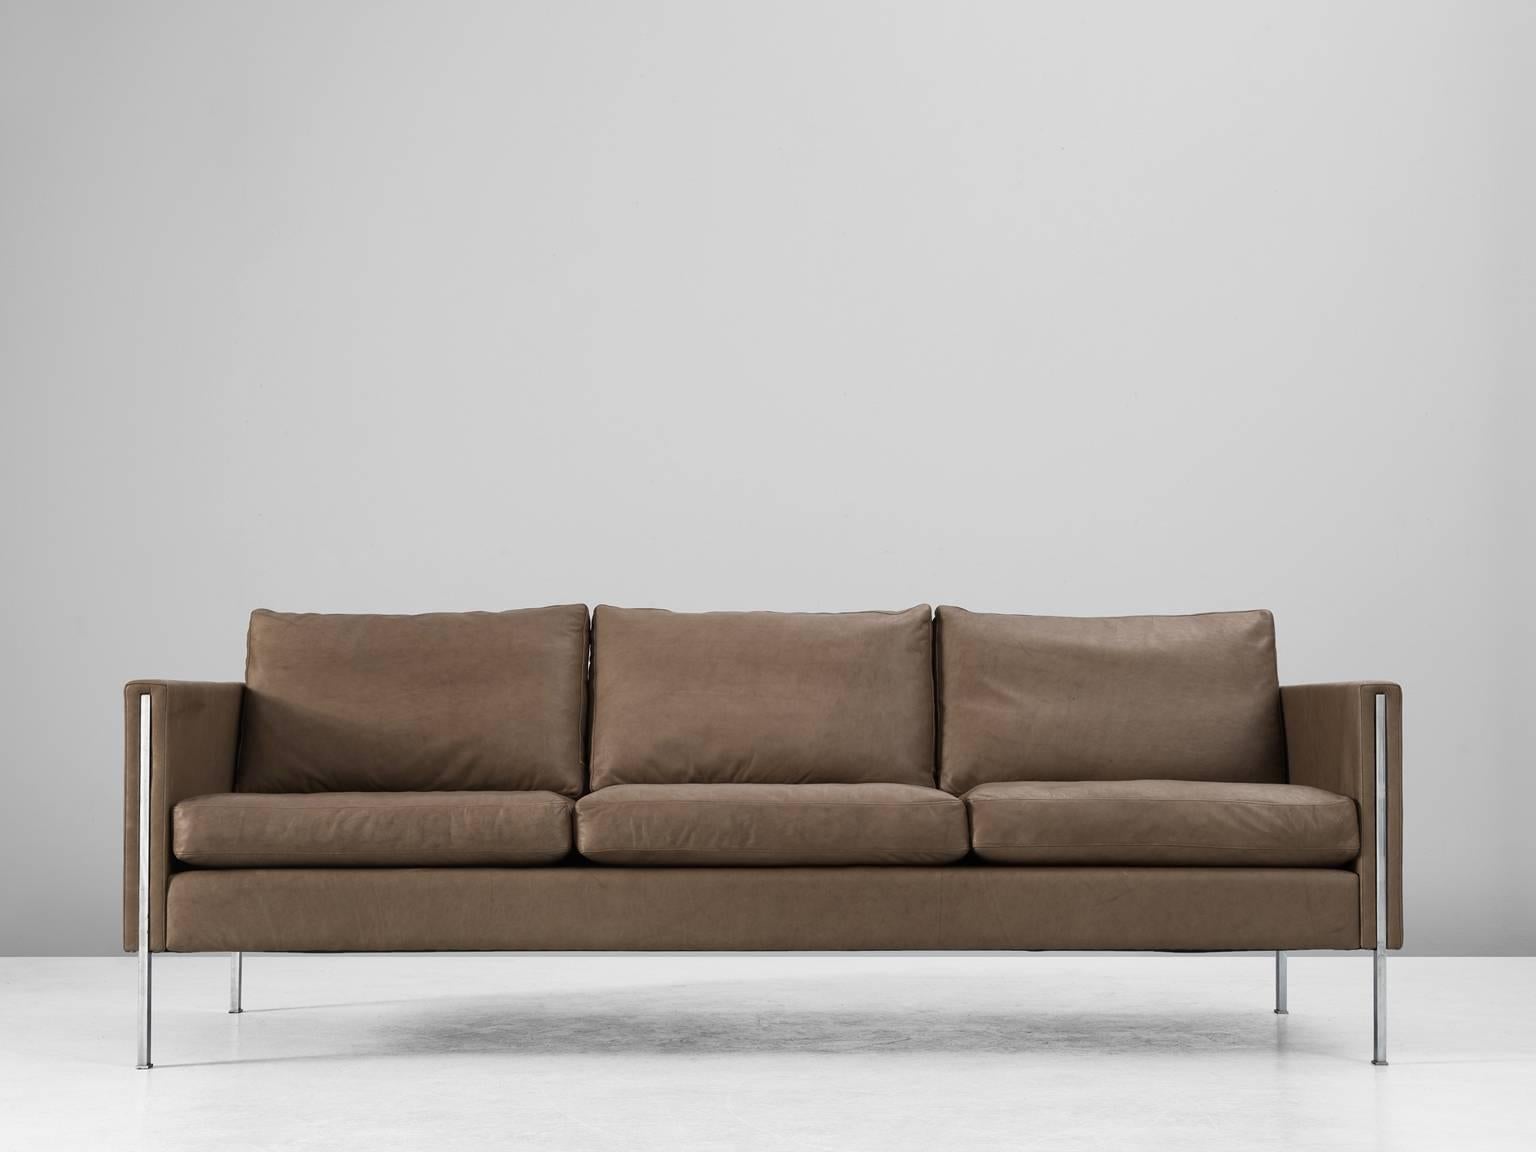 Sofa model '442/3', in leather and steel by Pierre Paulin for Artifort, the Netherlands, 1962. 

This comfortable three-seat sofa shows elegant steel details. The combination of steel and the brown leather upholstery gives this sofa it's modern